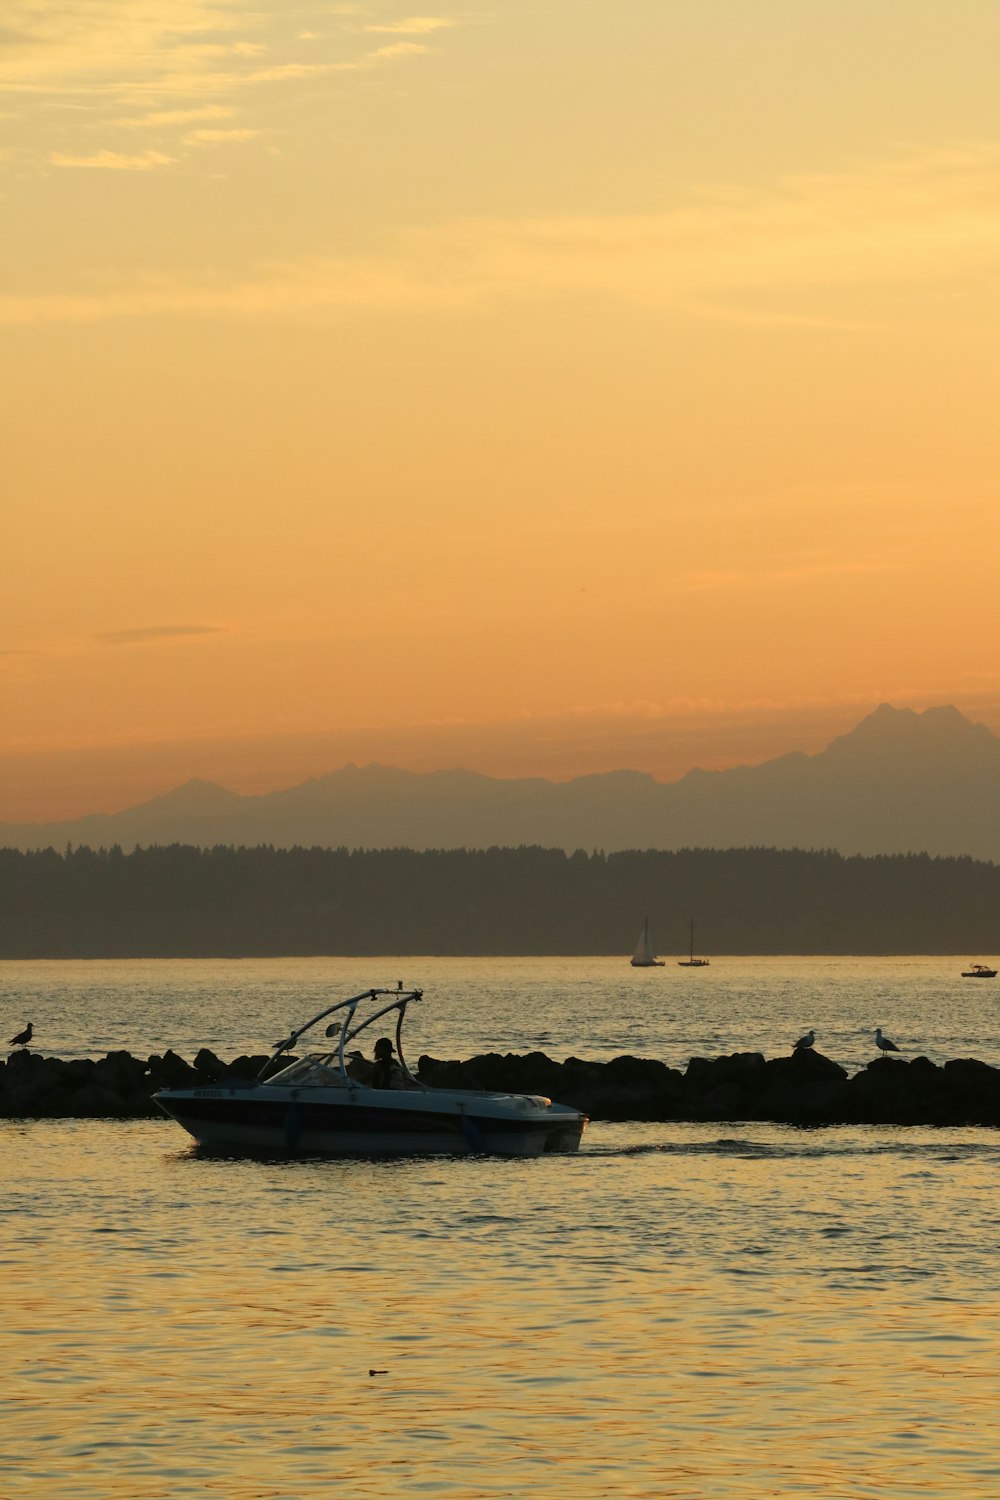 a boat in the water at sunset with mountains in the background